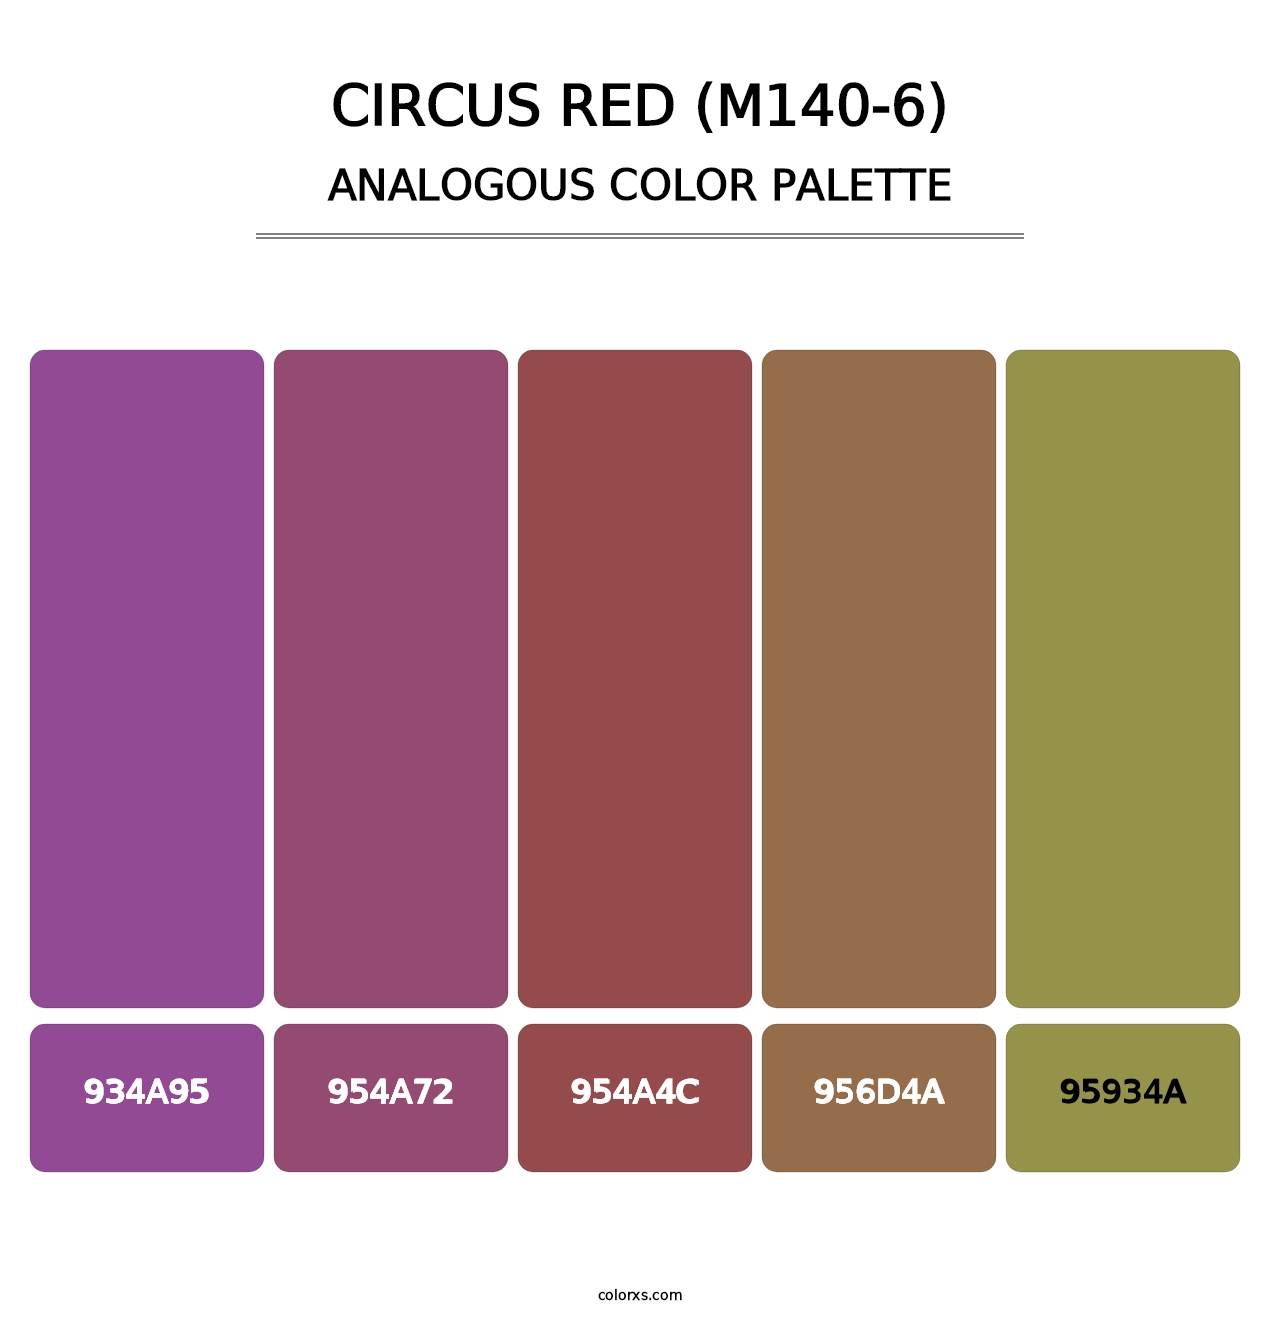 Circus Red (M140-6) - Analogous Color Palette